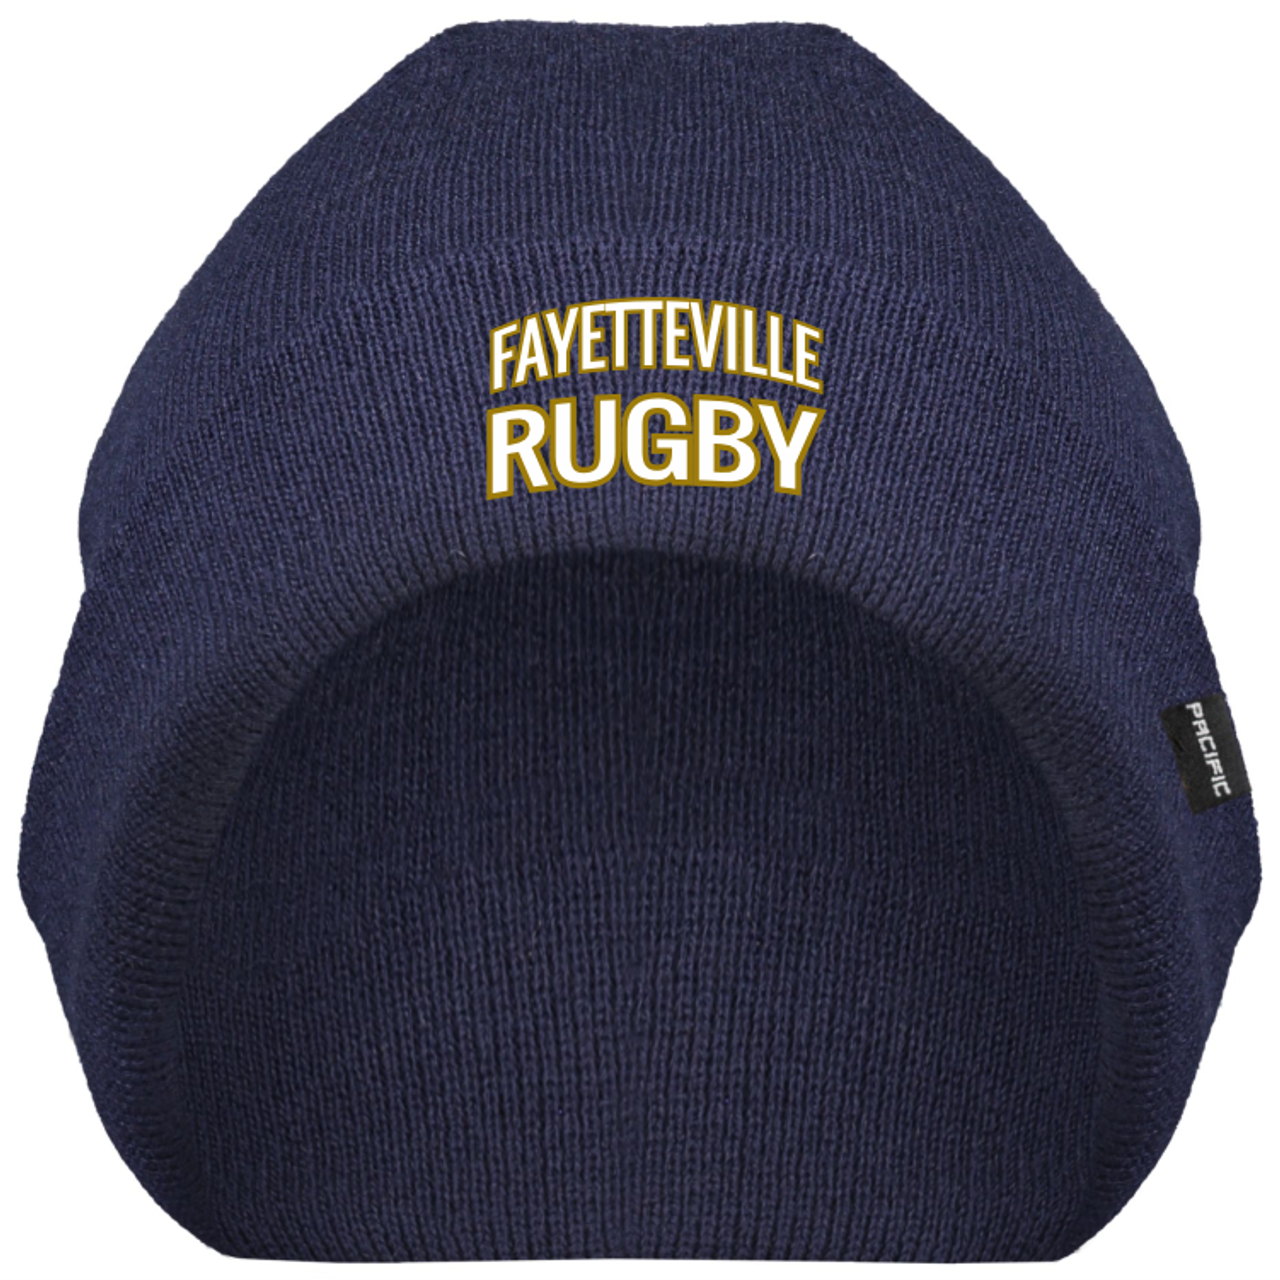 Fayetteville Area Rugby Fisherman Beanie, Navy